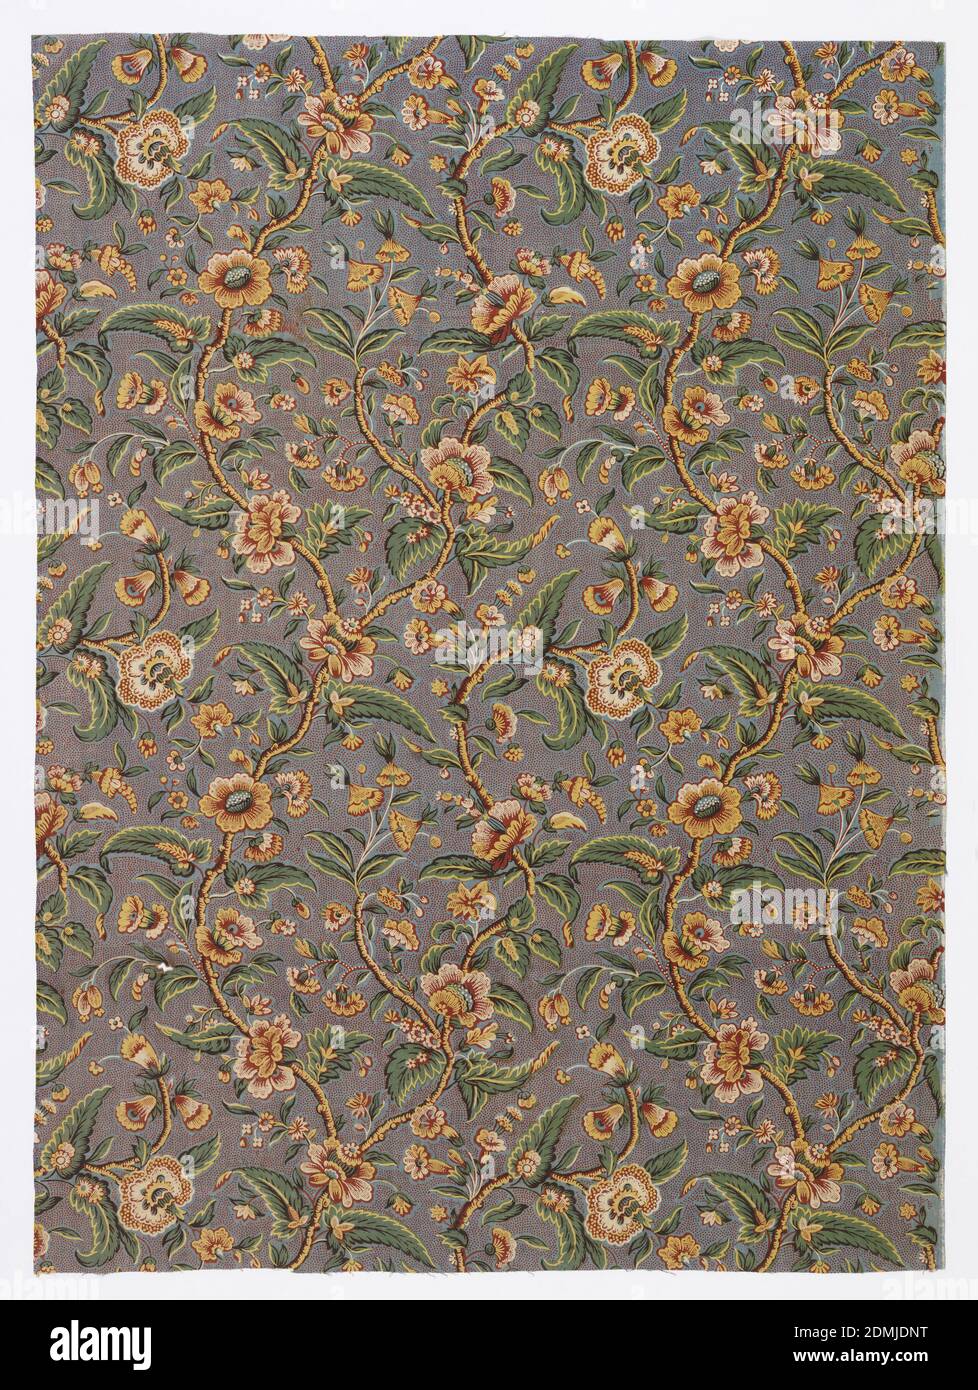 Textile, Medium: cotton Technique: printed on plain weave, Vertical pattern of continuously curving branches supporting flowers and leaves printed on ivory ground in yellow, red, green, blue, and black on a blue background patterned with red microdots. A complex sequence of printing and dyeing techniques, including resist printing and immersion dyeing were used to create this densely patterned textile., England, ca. 1810, printed, dyed & painted textiles, Textile Stock Photo